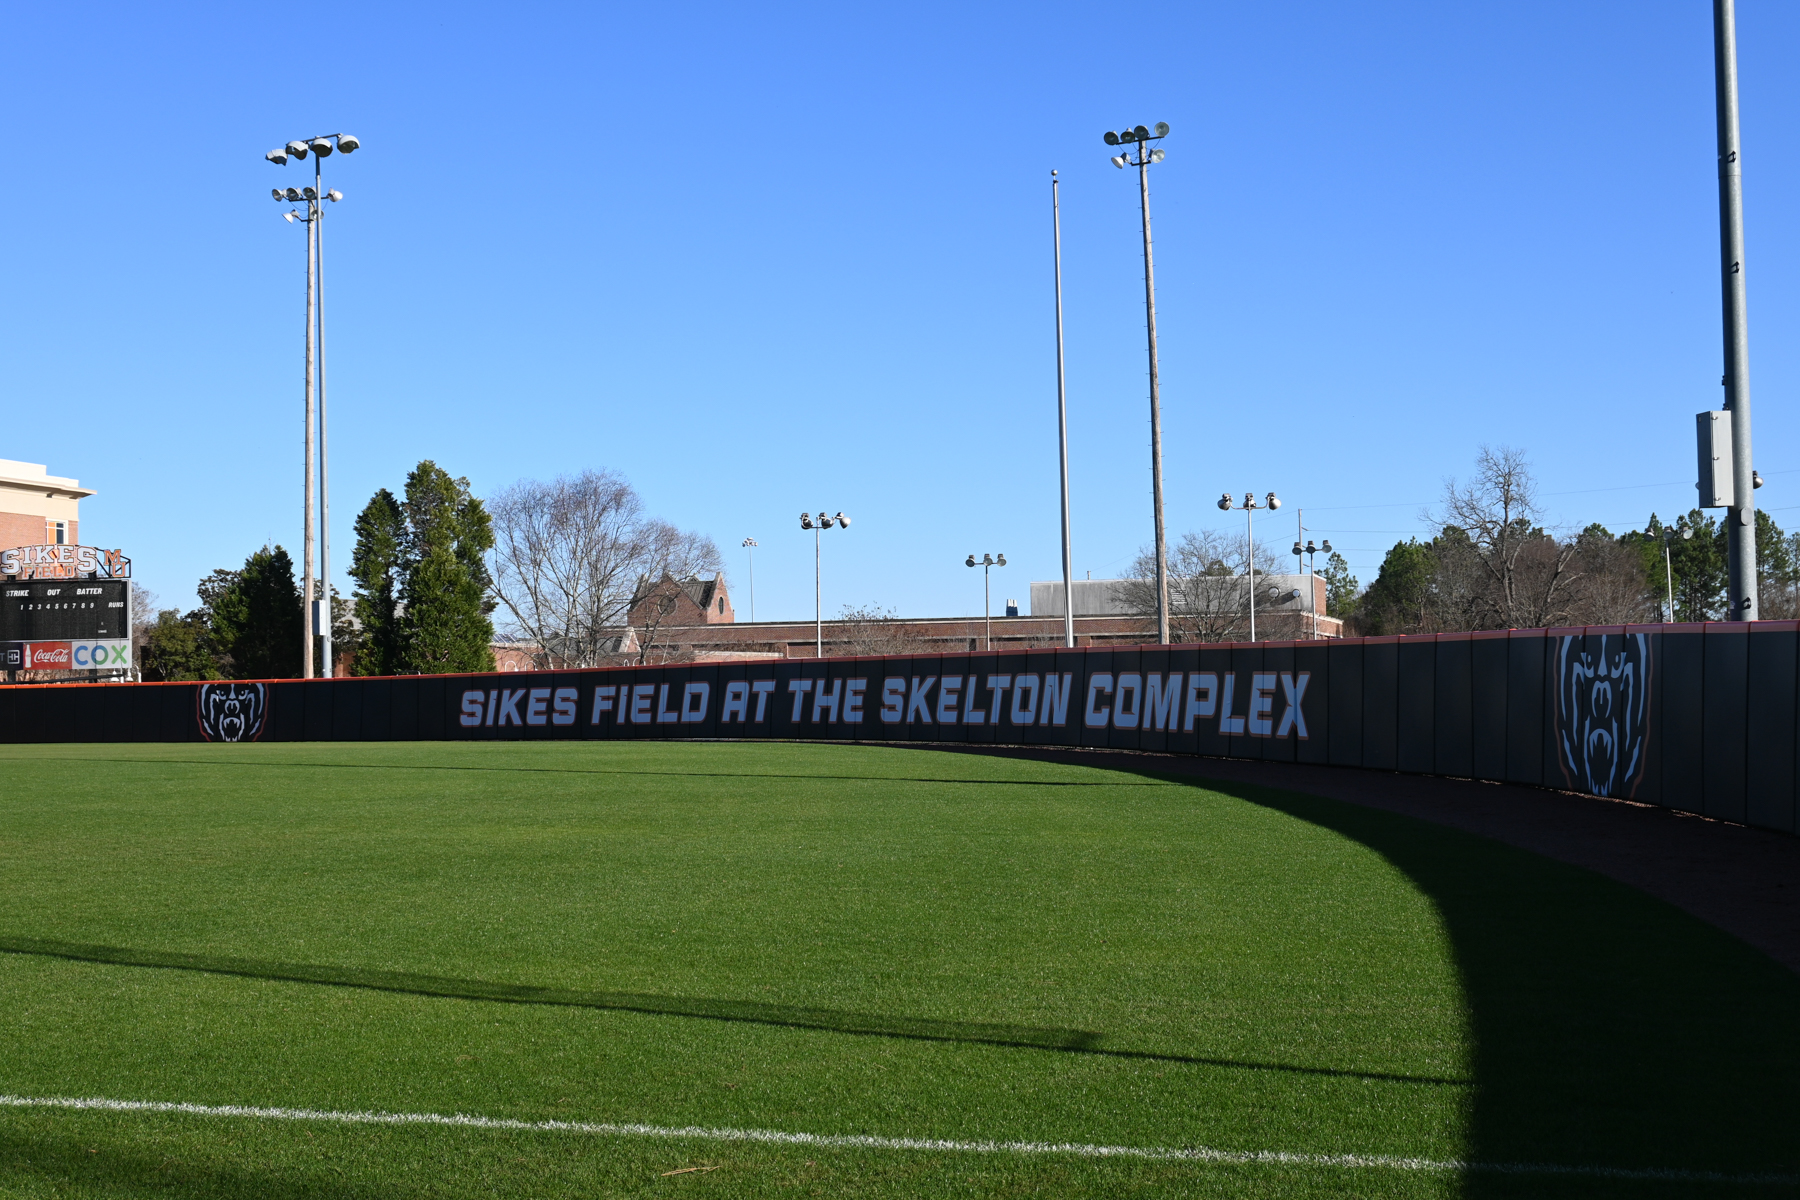 outfield. wall says sikes field at the skelton complex